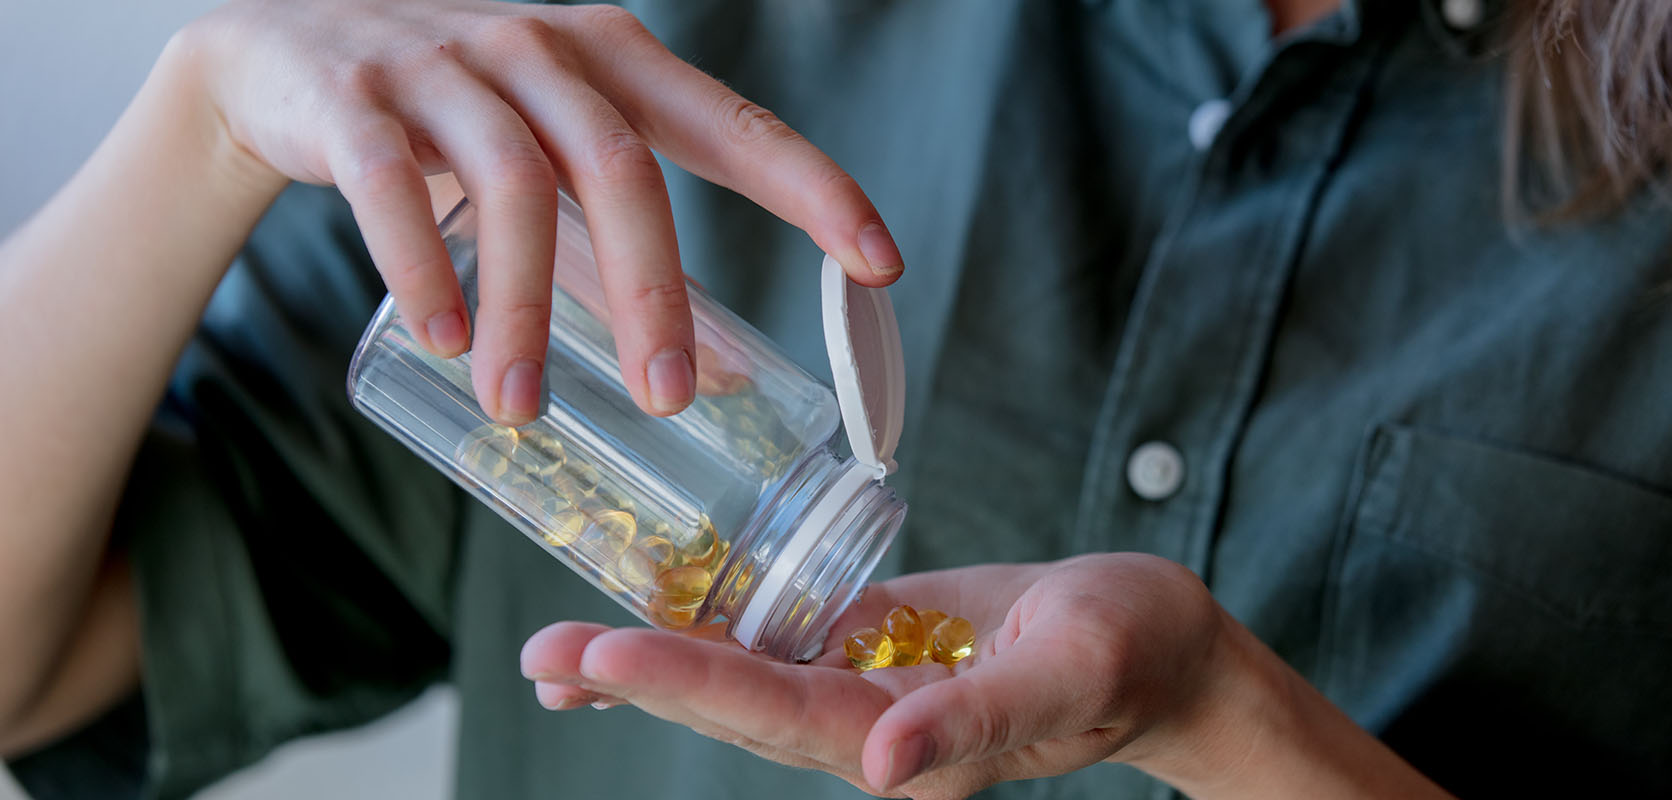 Woman taking thc distillates in capsule form. buy weed online in canada.